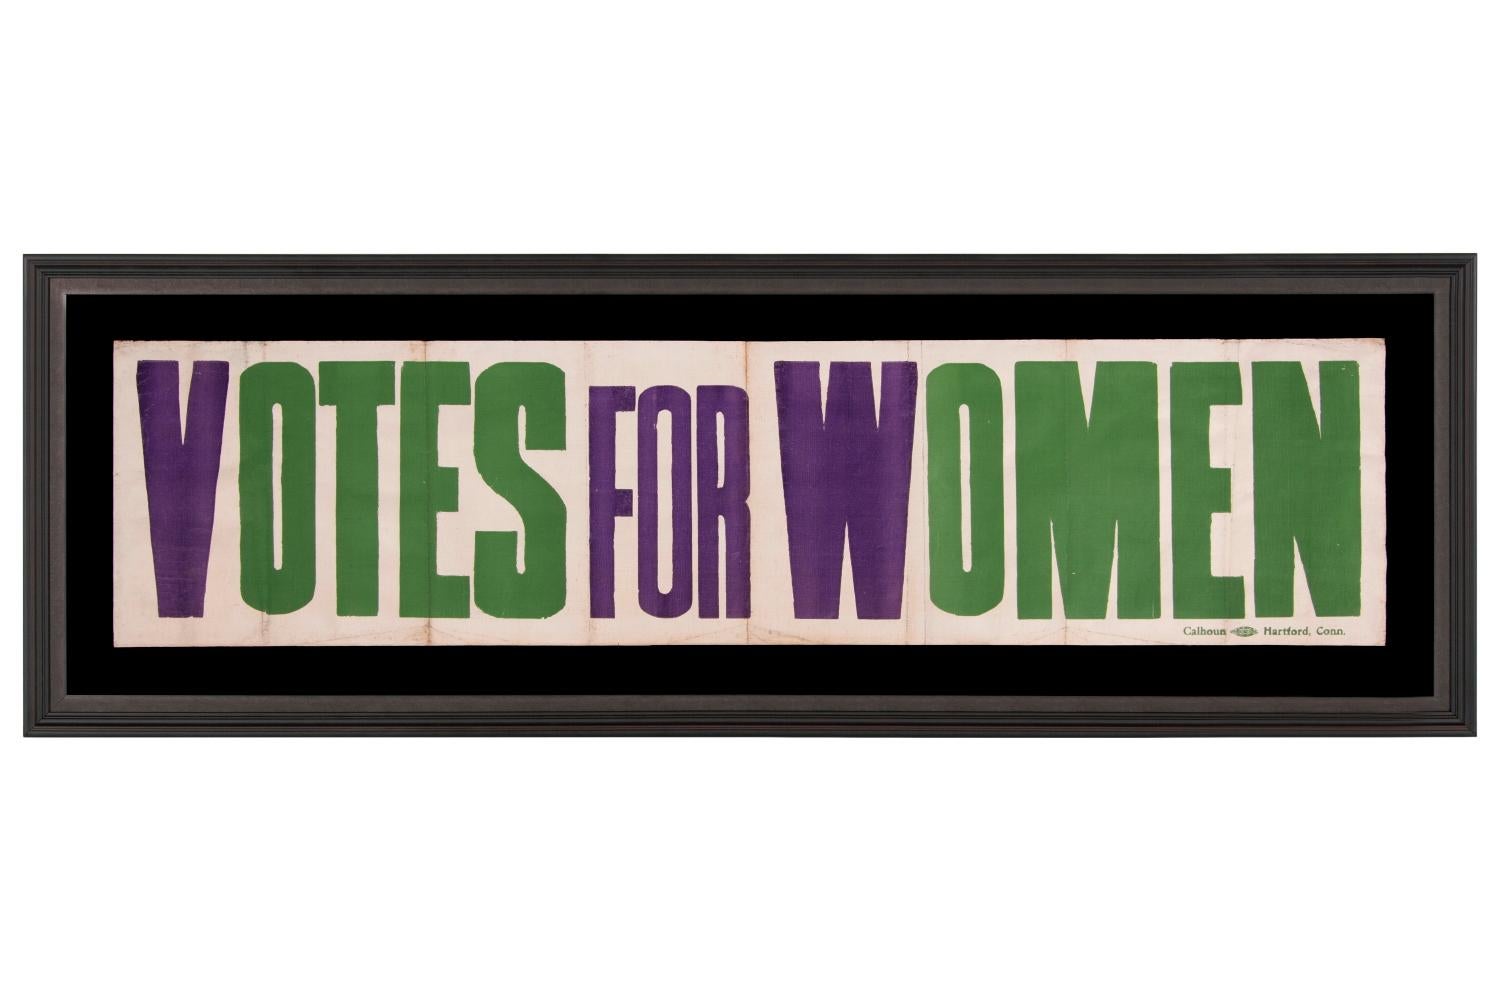 Exceptional Large Votes for Women Banner in Violet & Green, Made in Hartford, CT